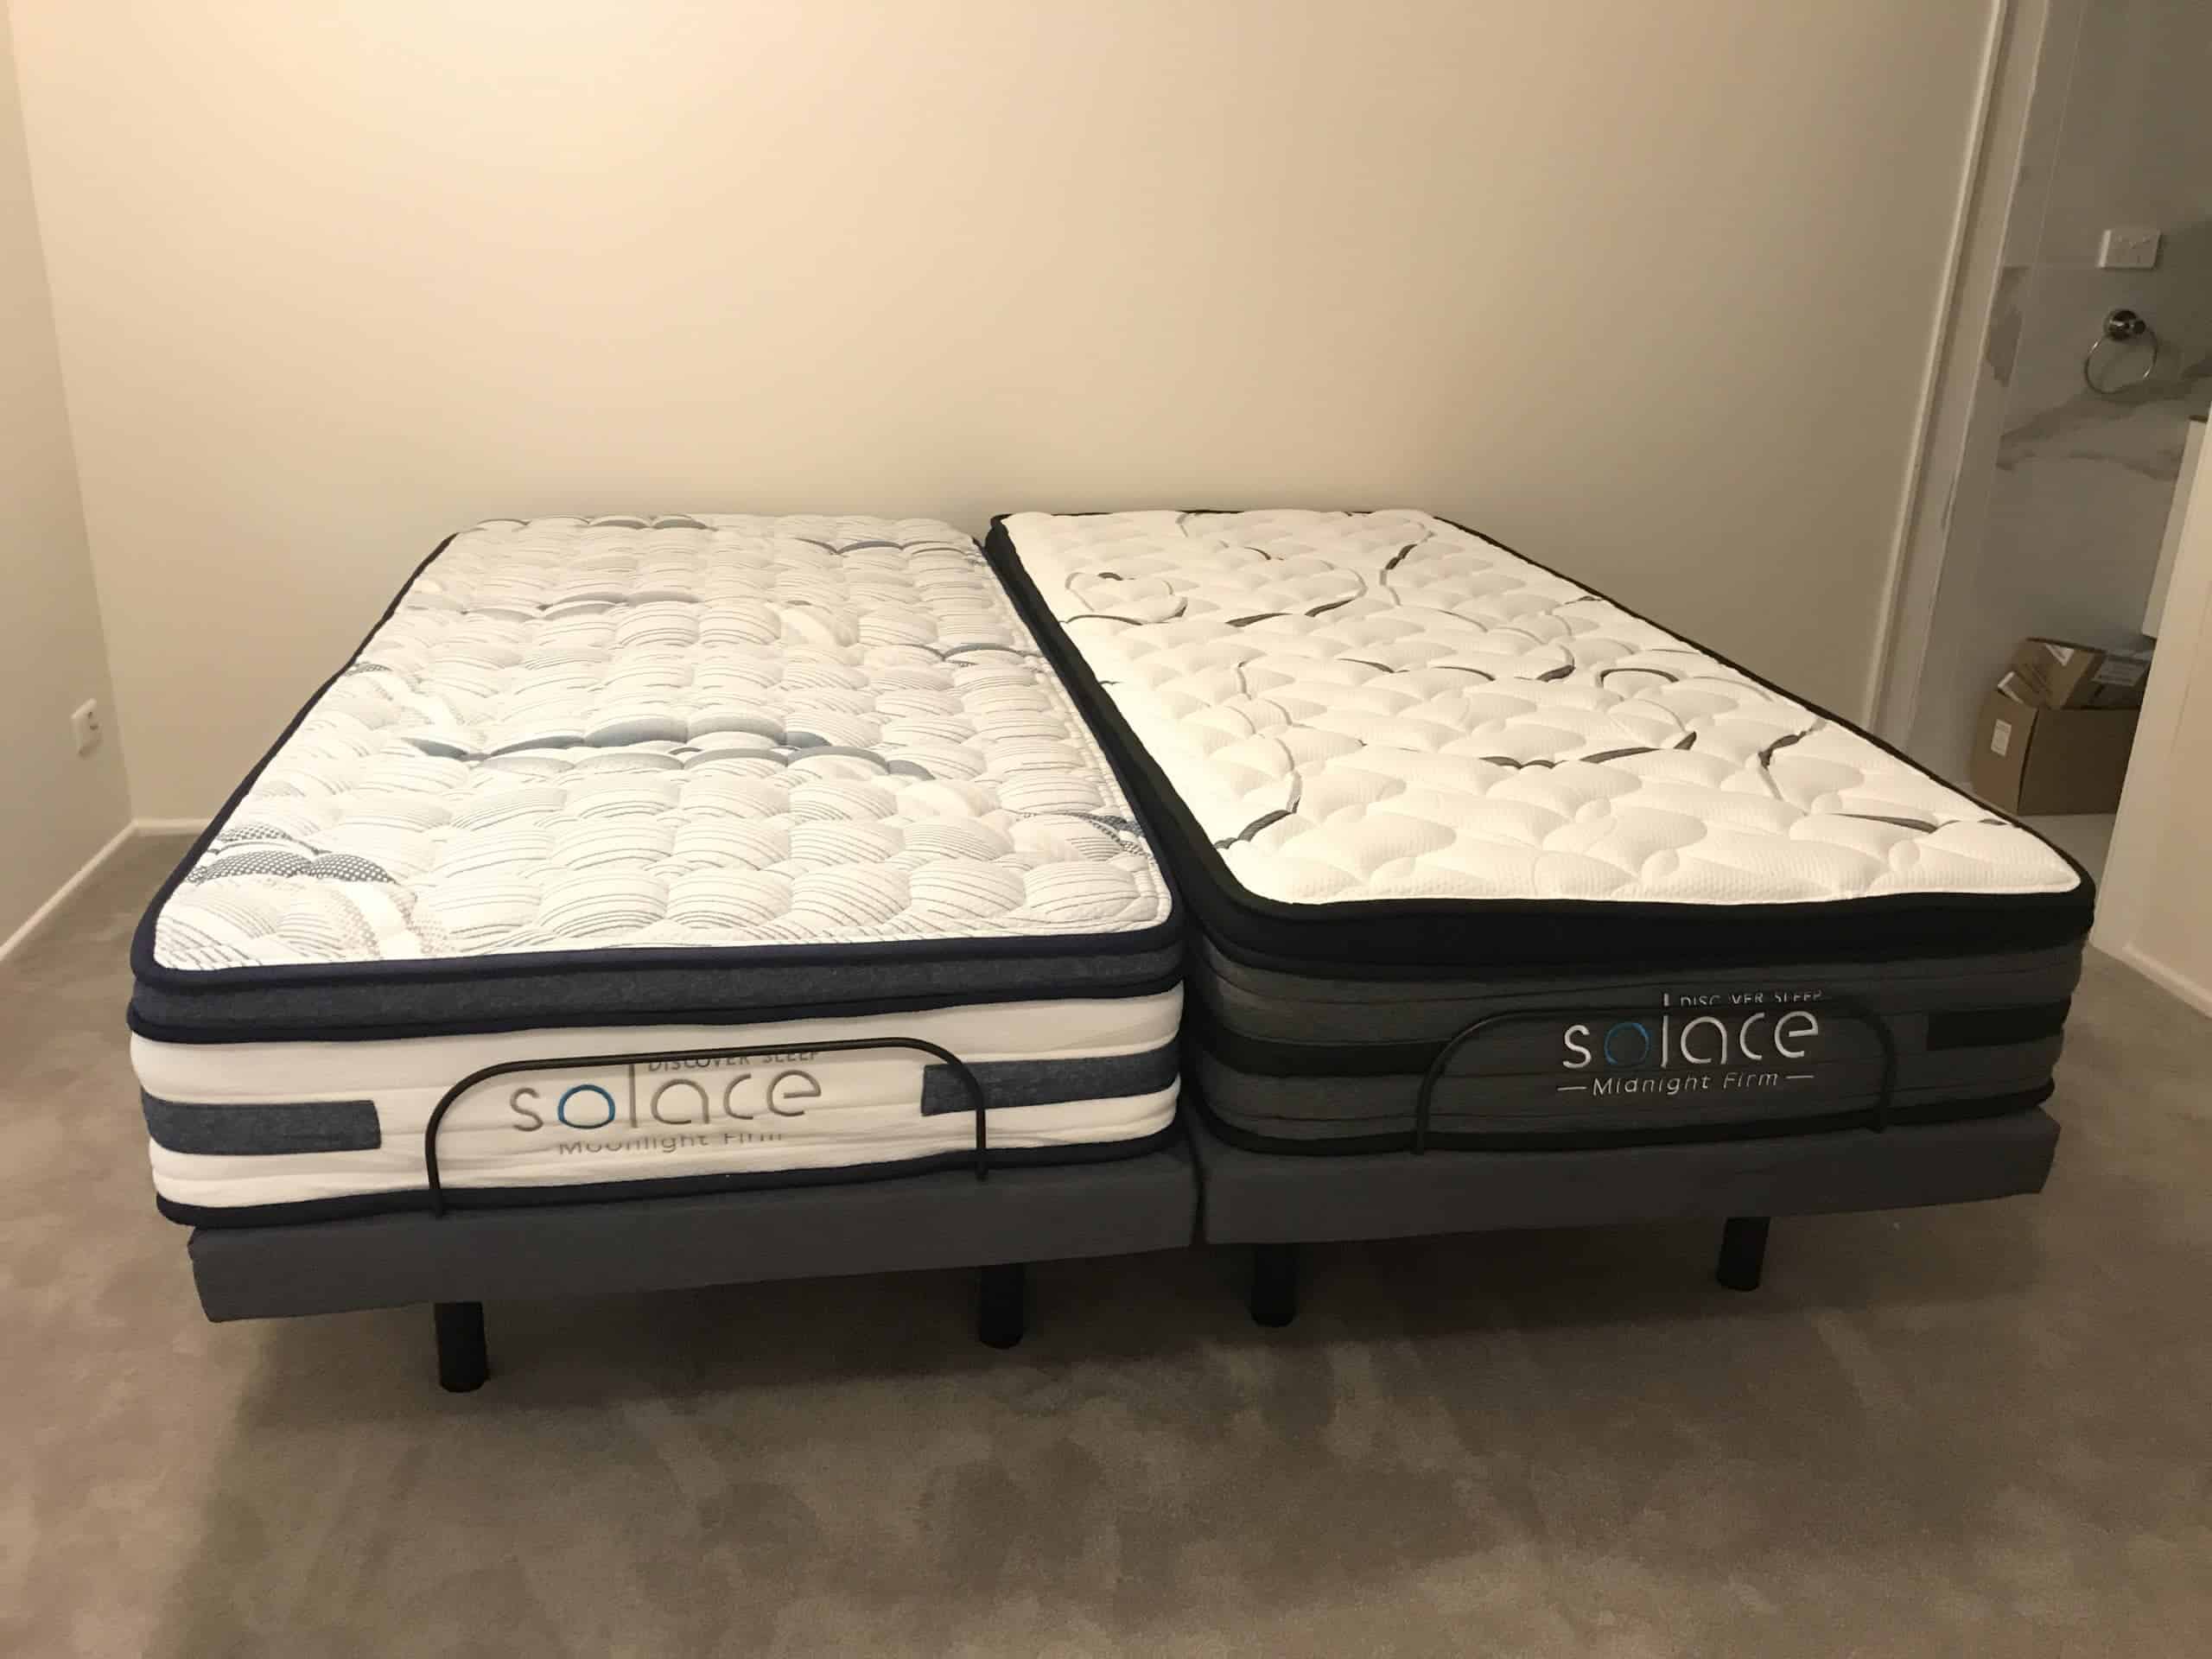 Solace Sleep adjustable bed review different mattresses